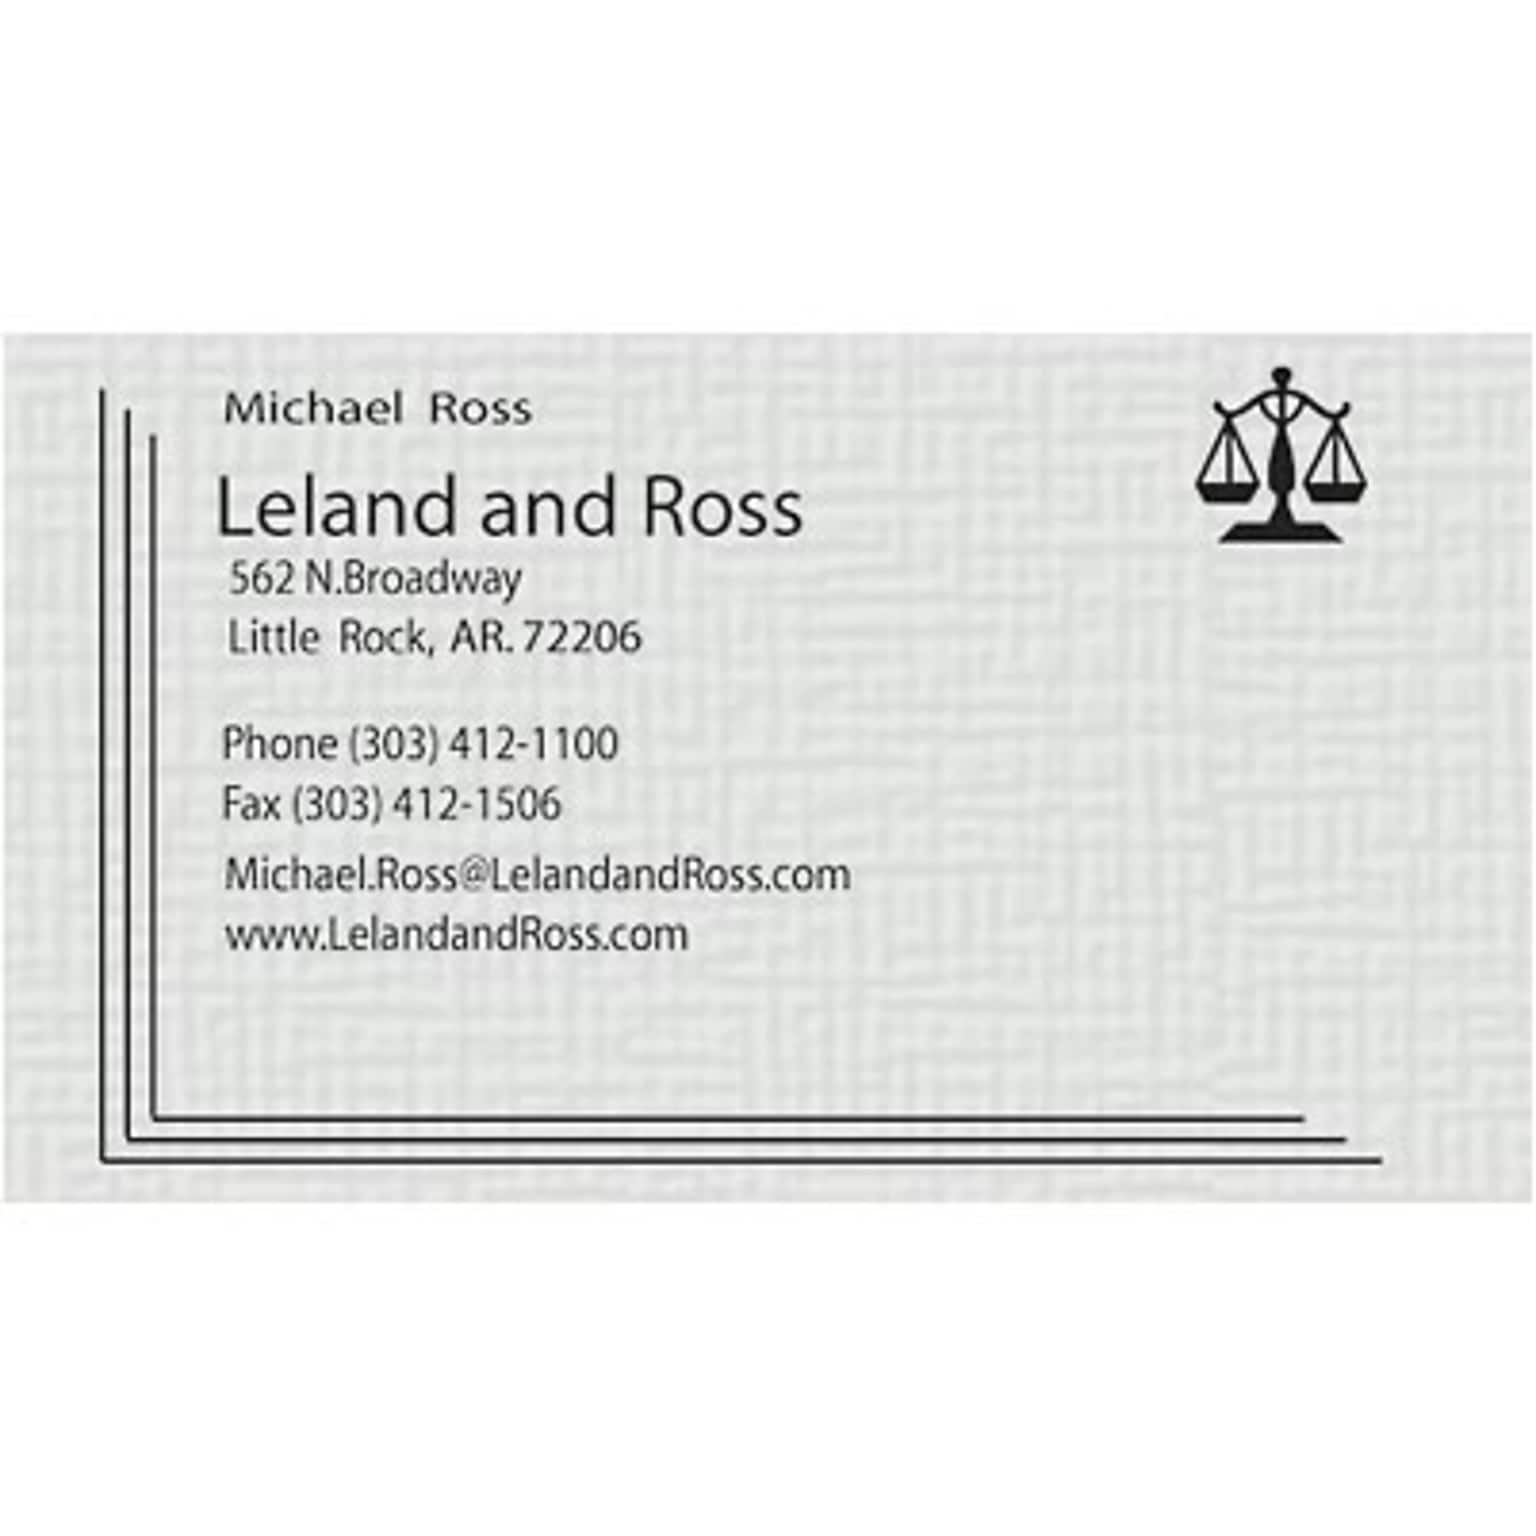 Custom 1-2 Color Business Cards, CLASSIC® Linen Antique Gray 80#, Raised Print, 2 Standard Inks, 1-Sided, 250/PK